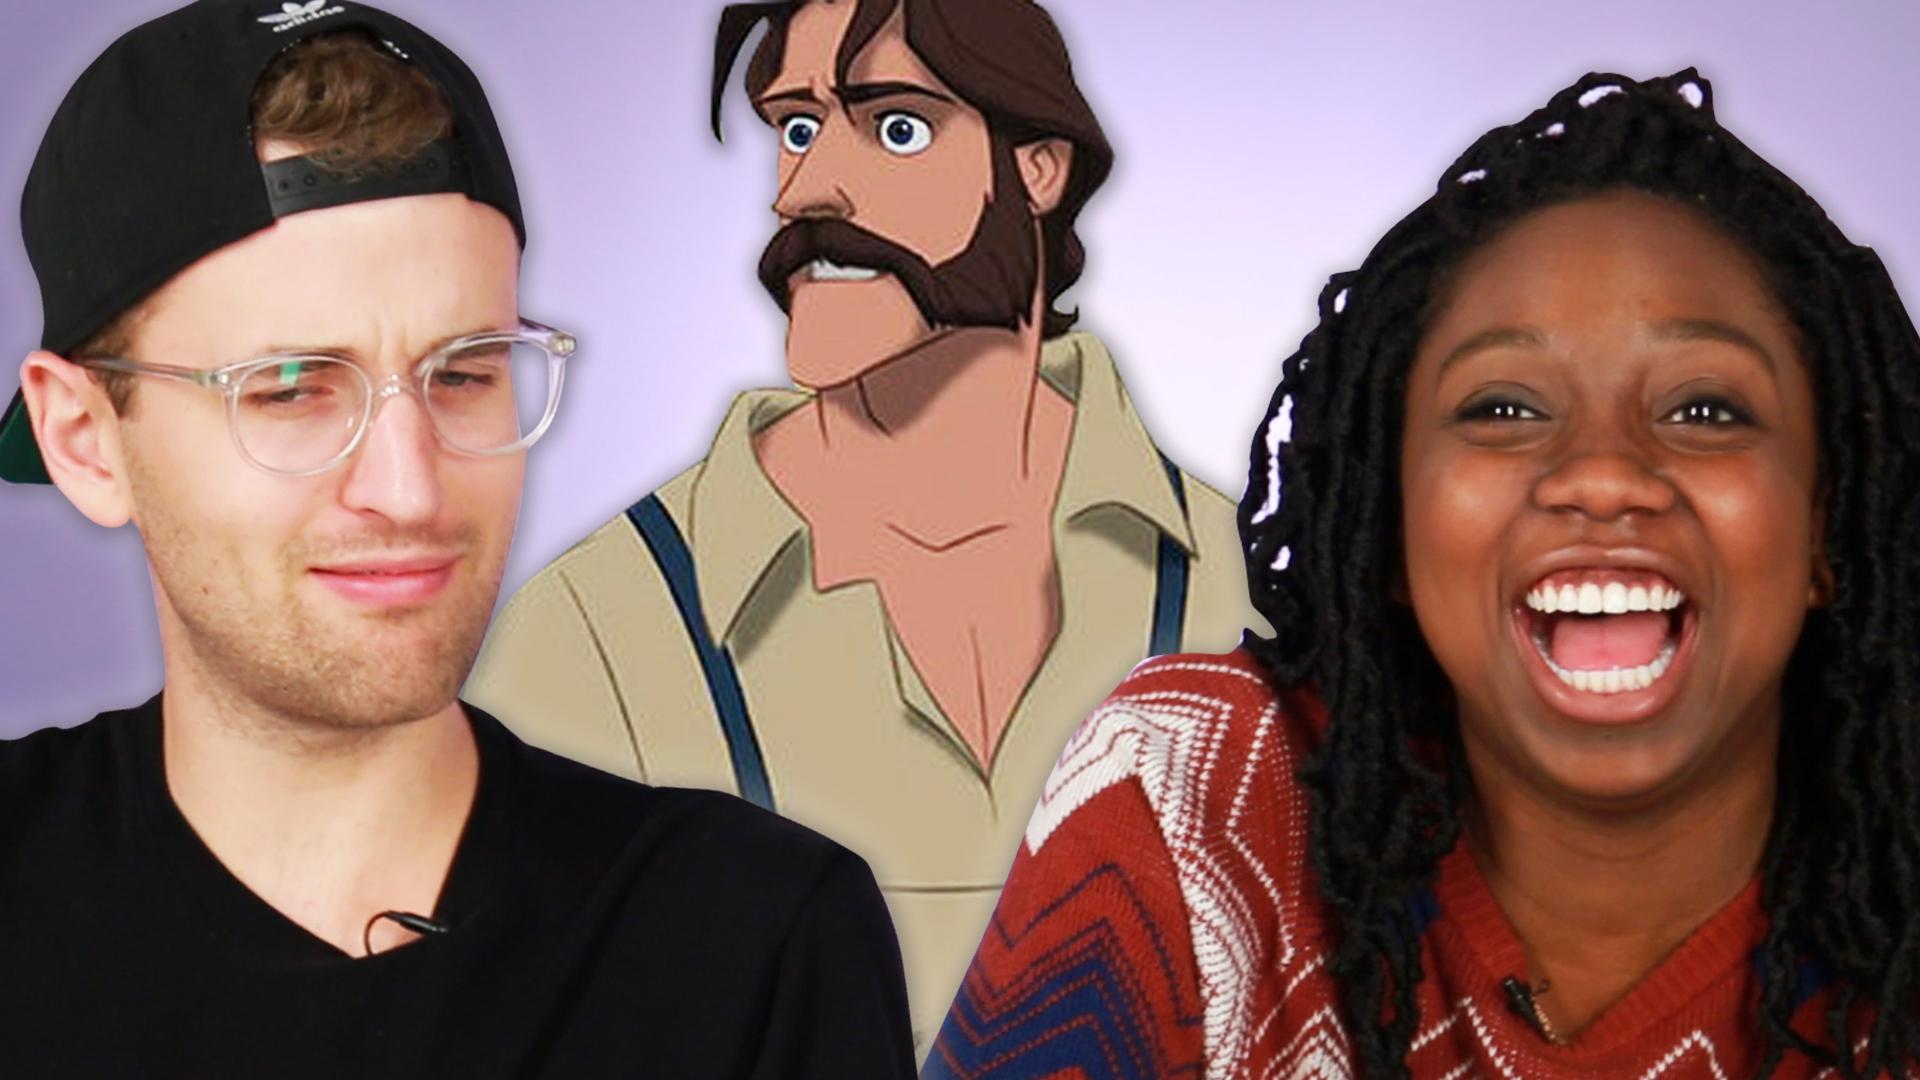 Watch: We Reviewed Hot Disney Dads.